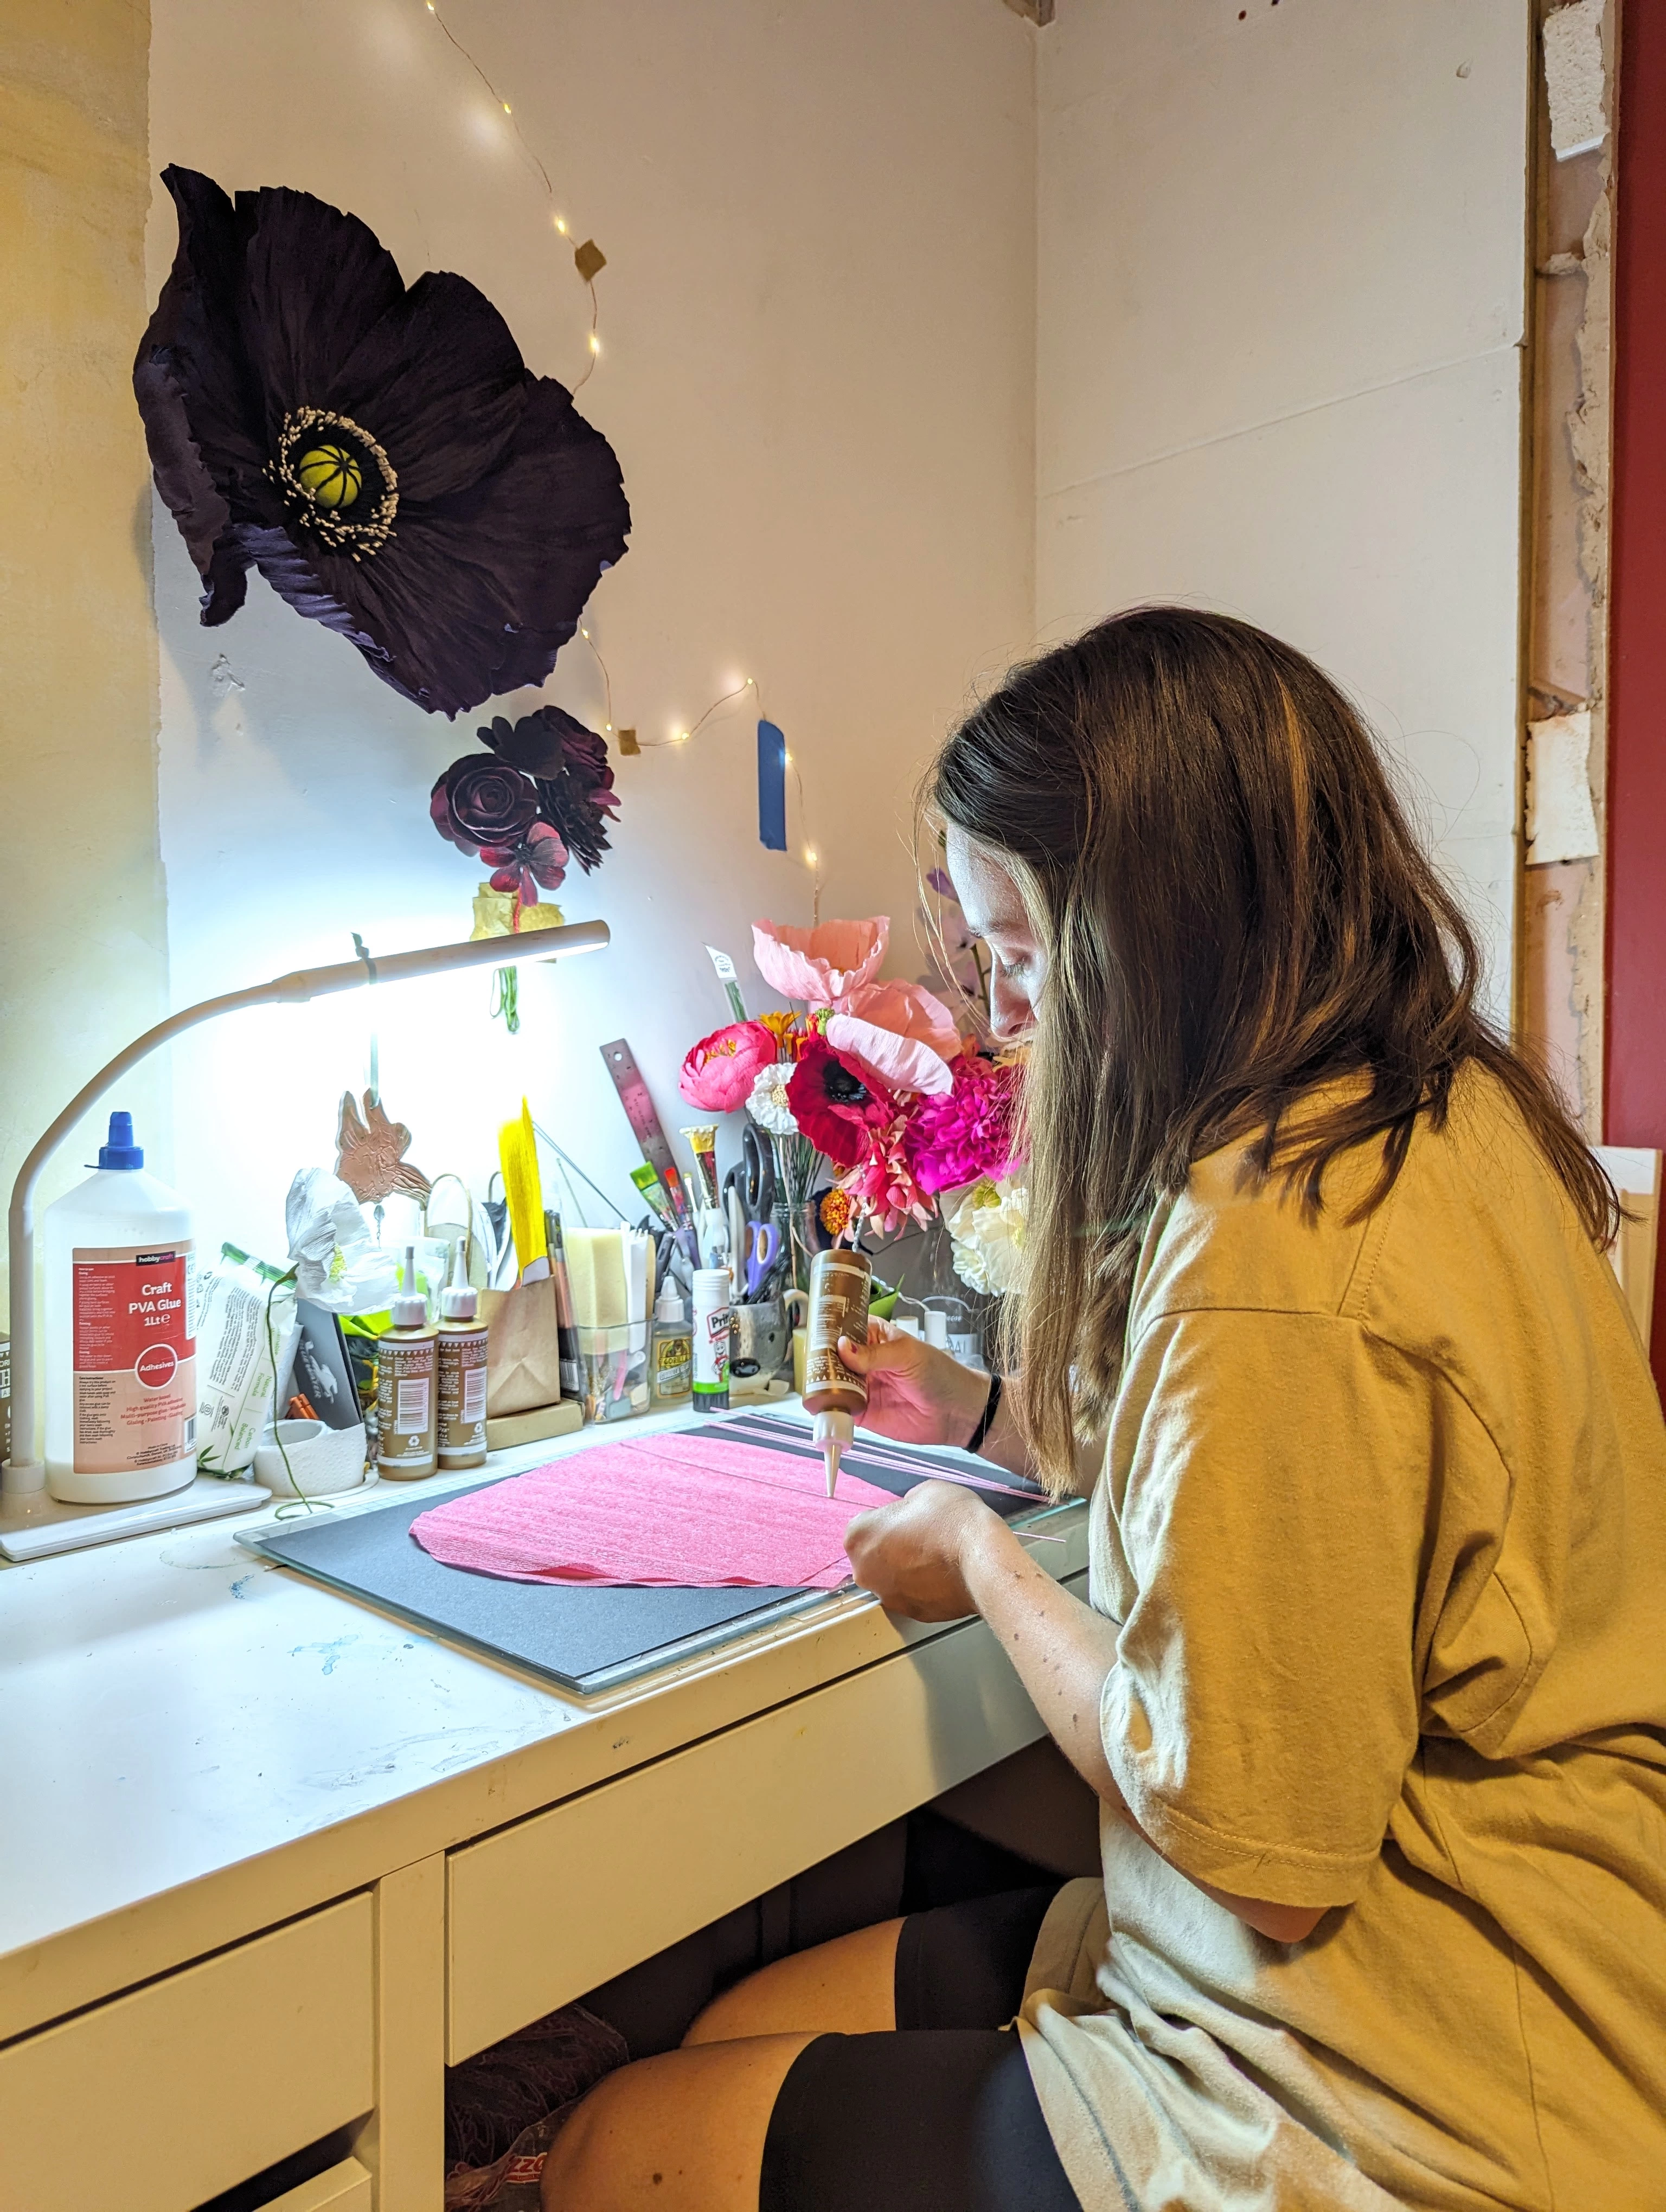 Photograph shows artist sitting at her desk making paper flowers